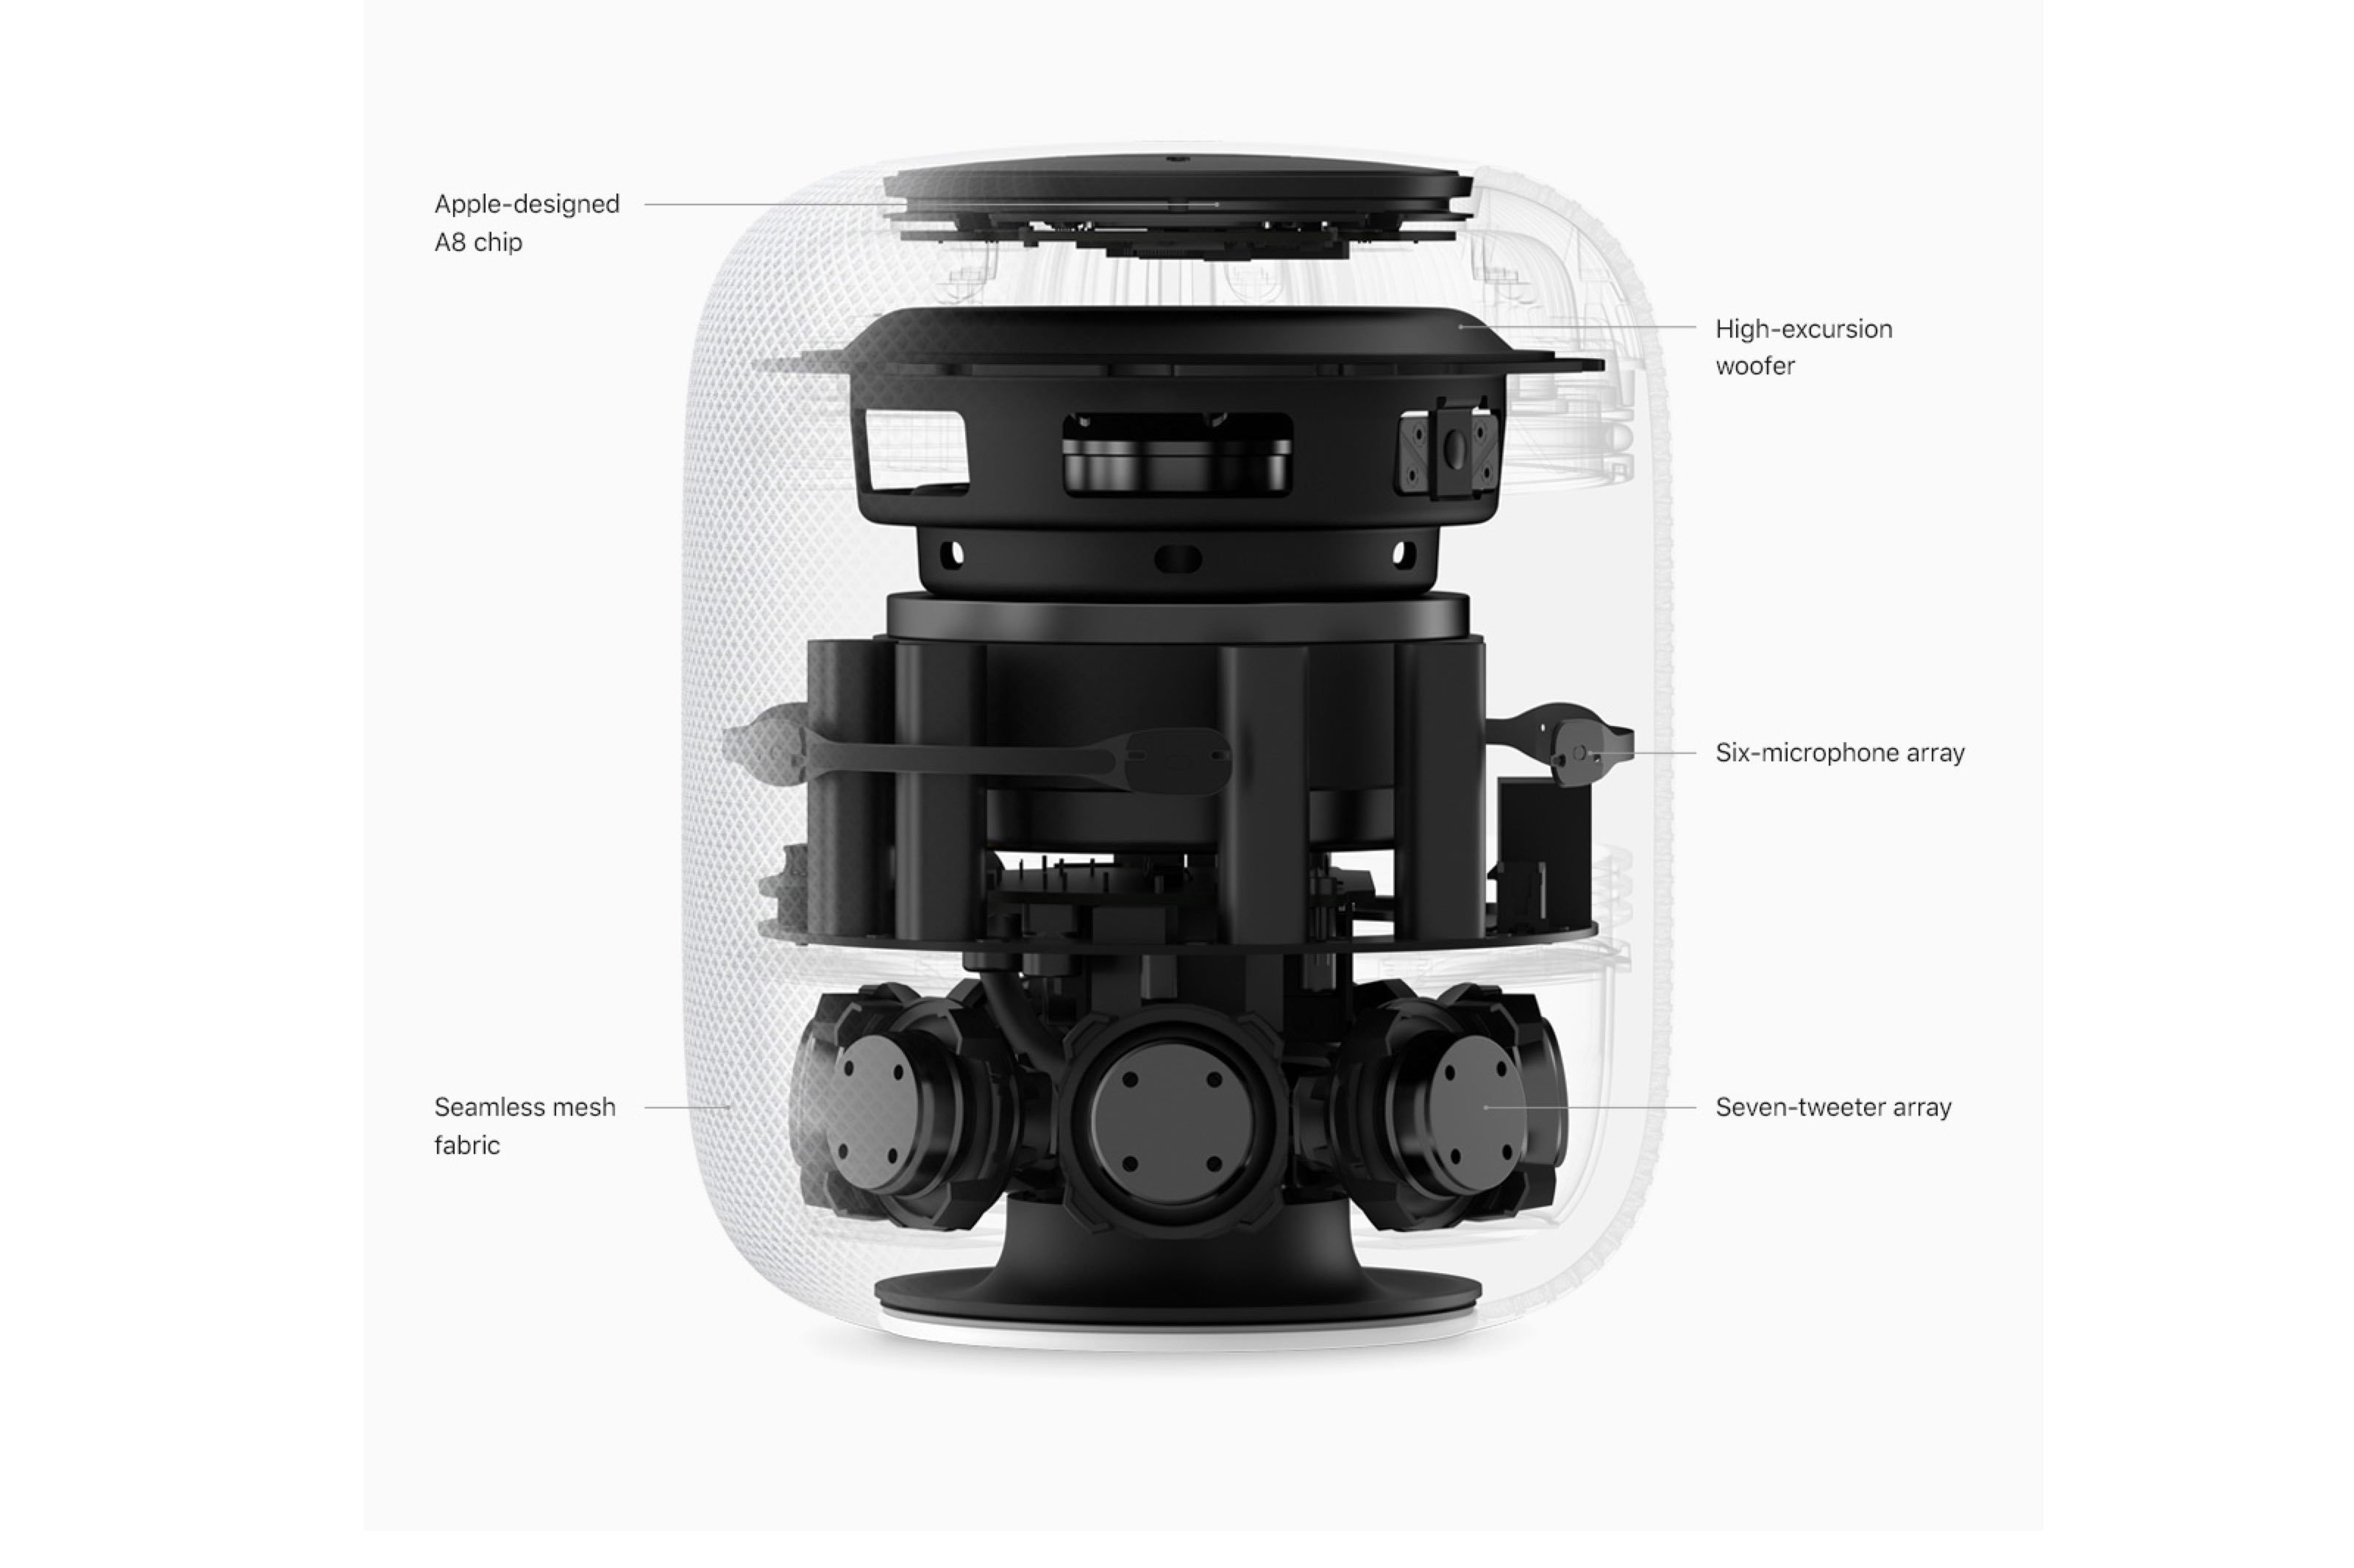 Why The Apple Homepod Sounds So Good image 5